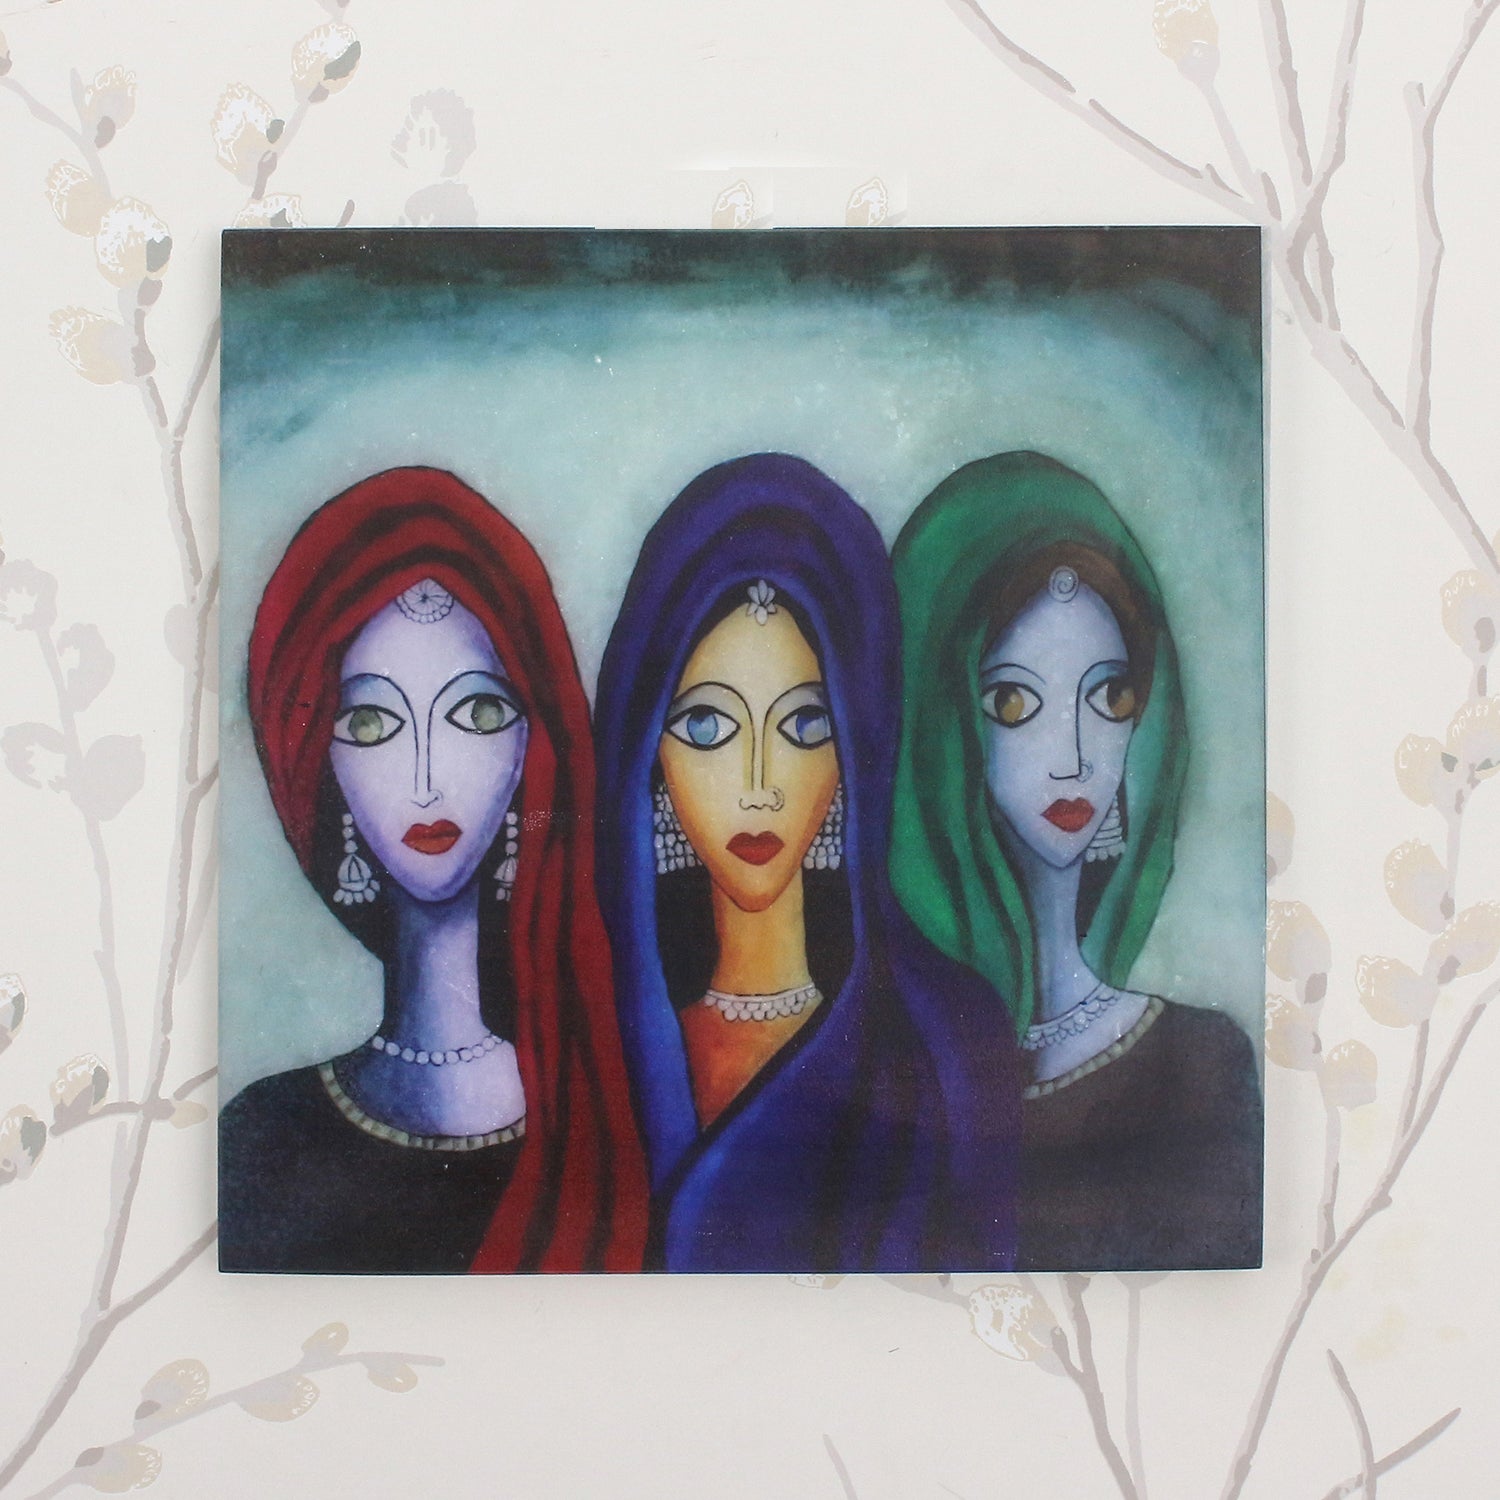 Abstract 3 Women Art Painting On Marble Square Tile